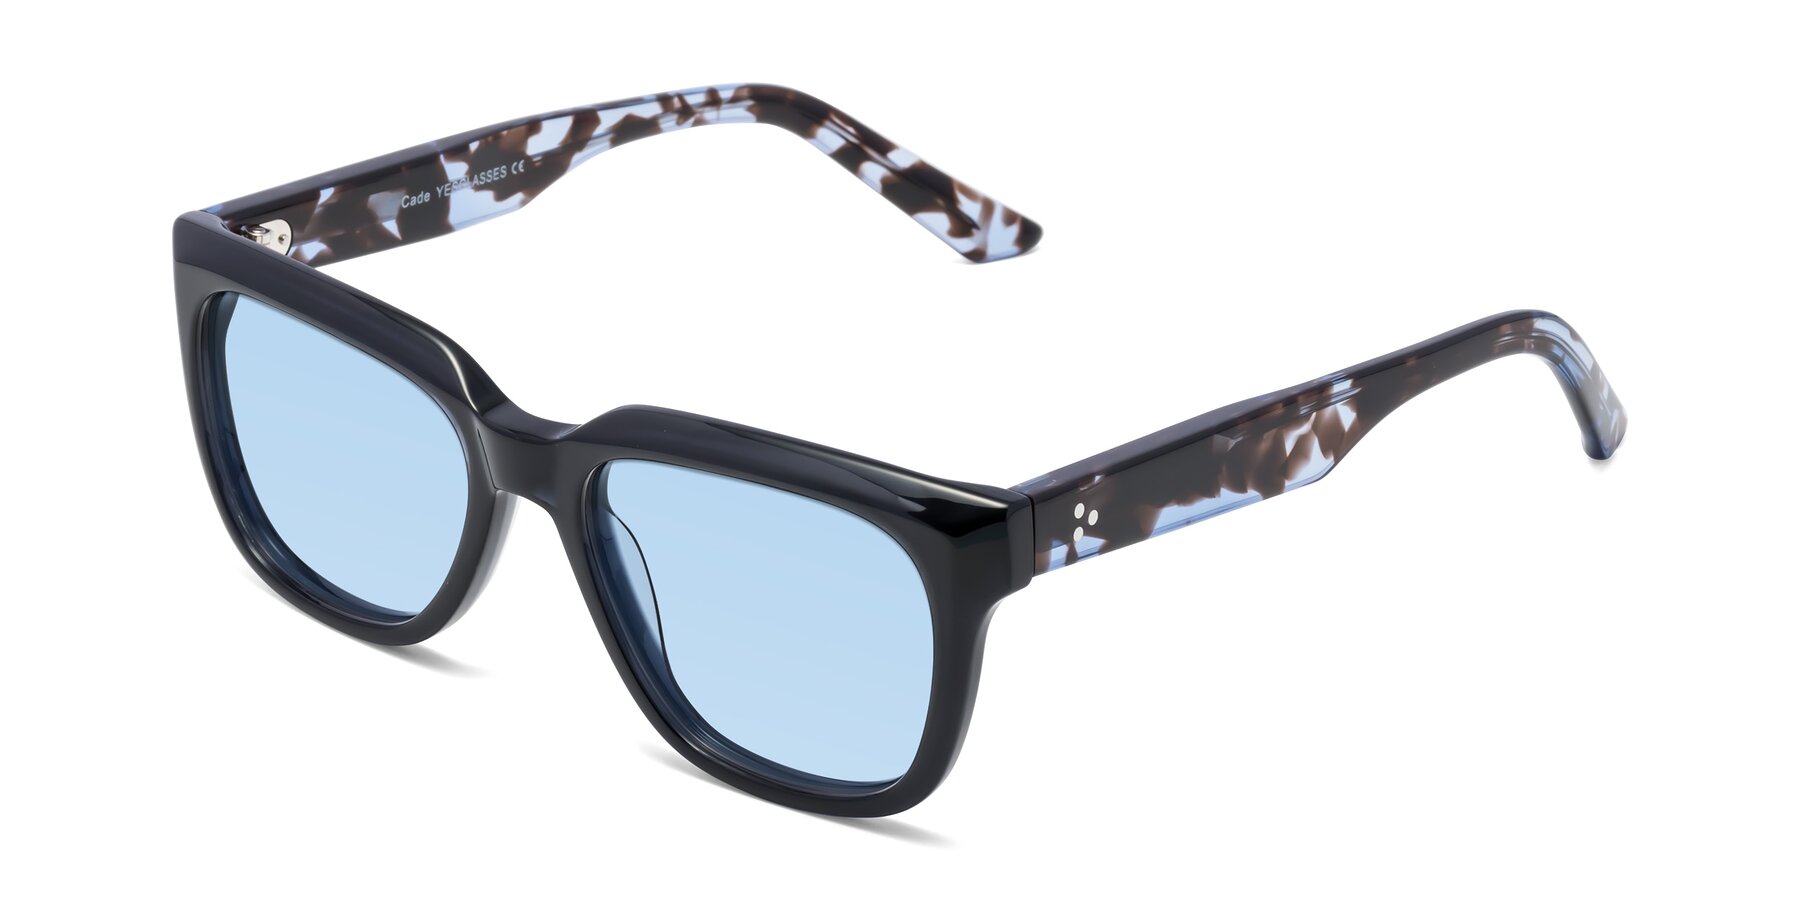 Angle of Cade in Dark Blue-Tortoise with Light Blue Tinted Lenses